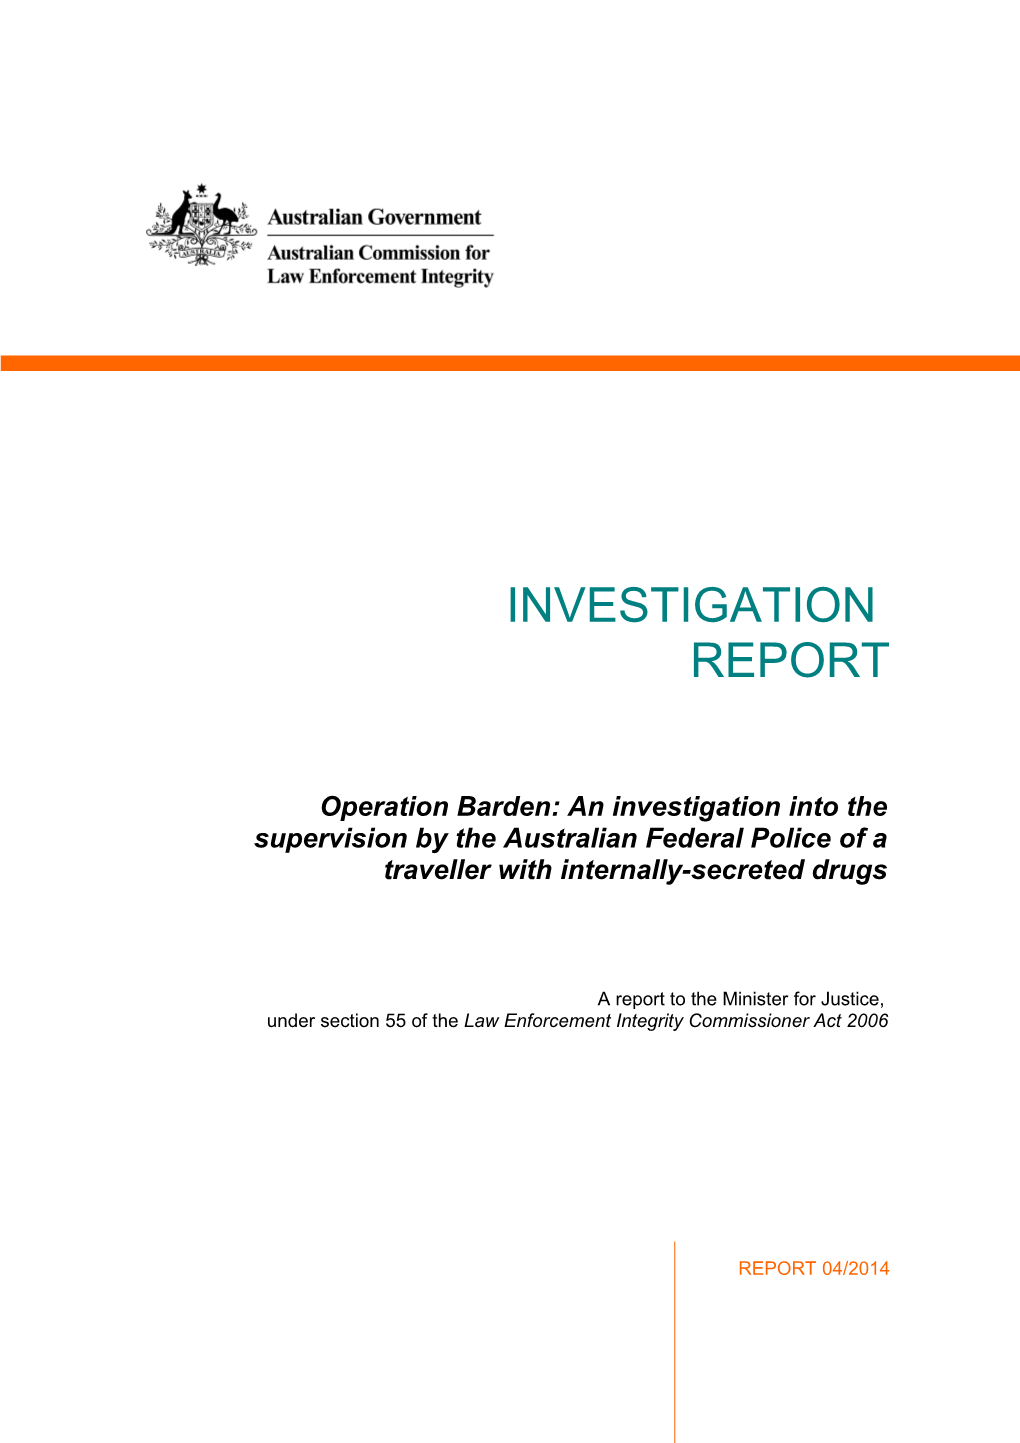 Operation Barden: an Investigation Into the Supervision by the Australian Federal Police